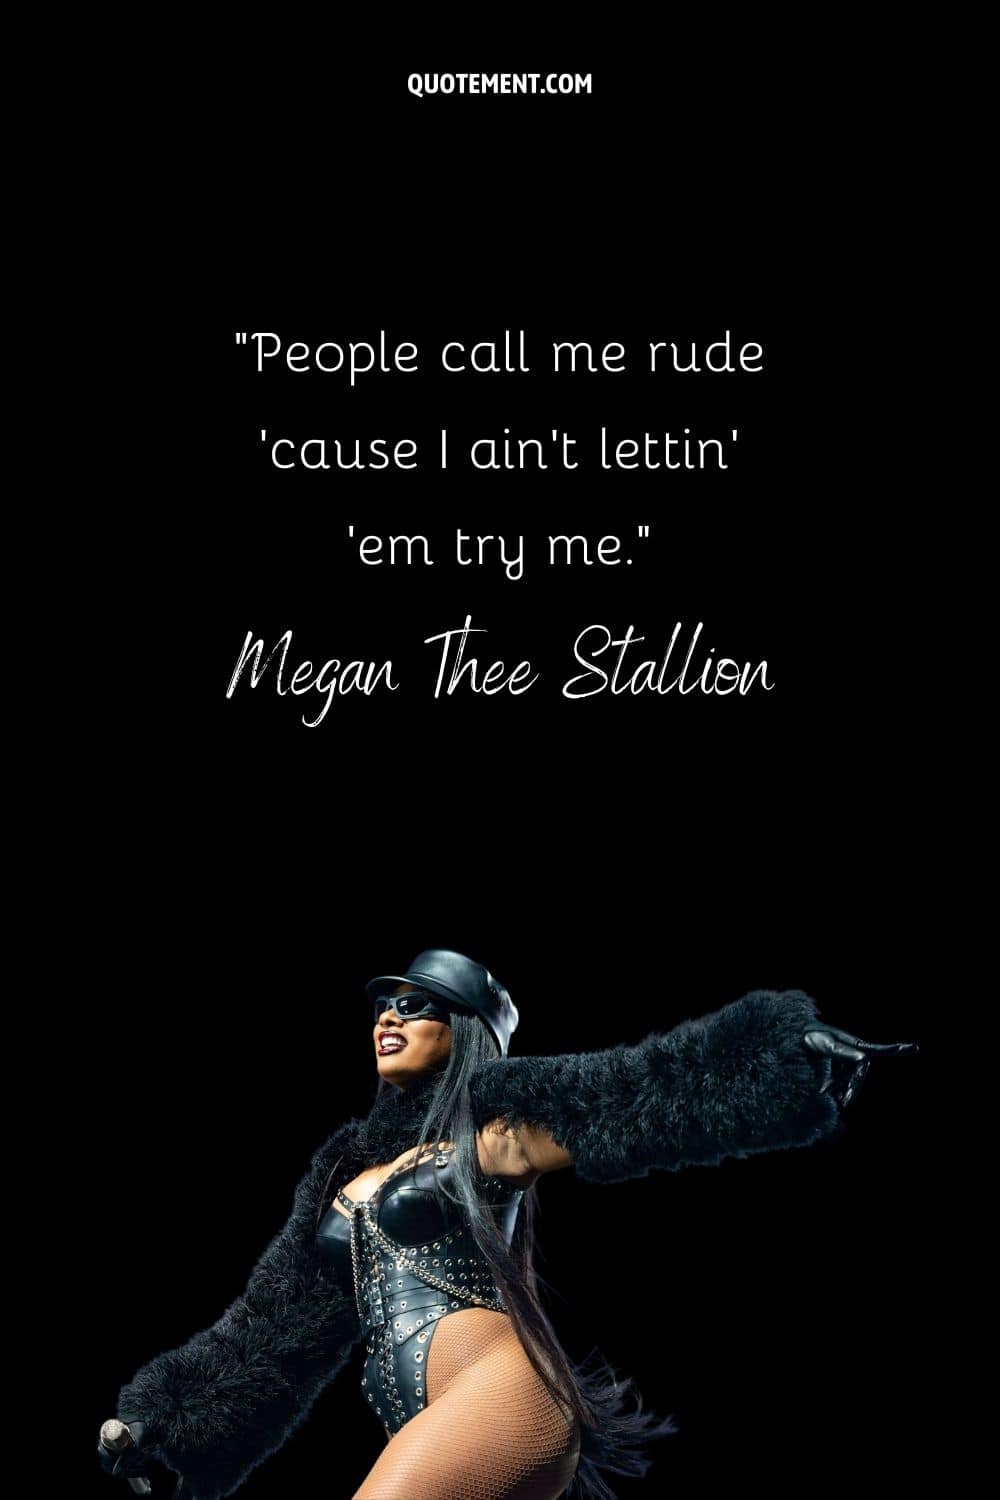 “People call me rude 'cause I ain't lettin' 'em try me.” — Megan Thee Stallion